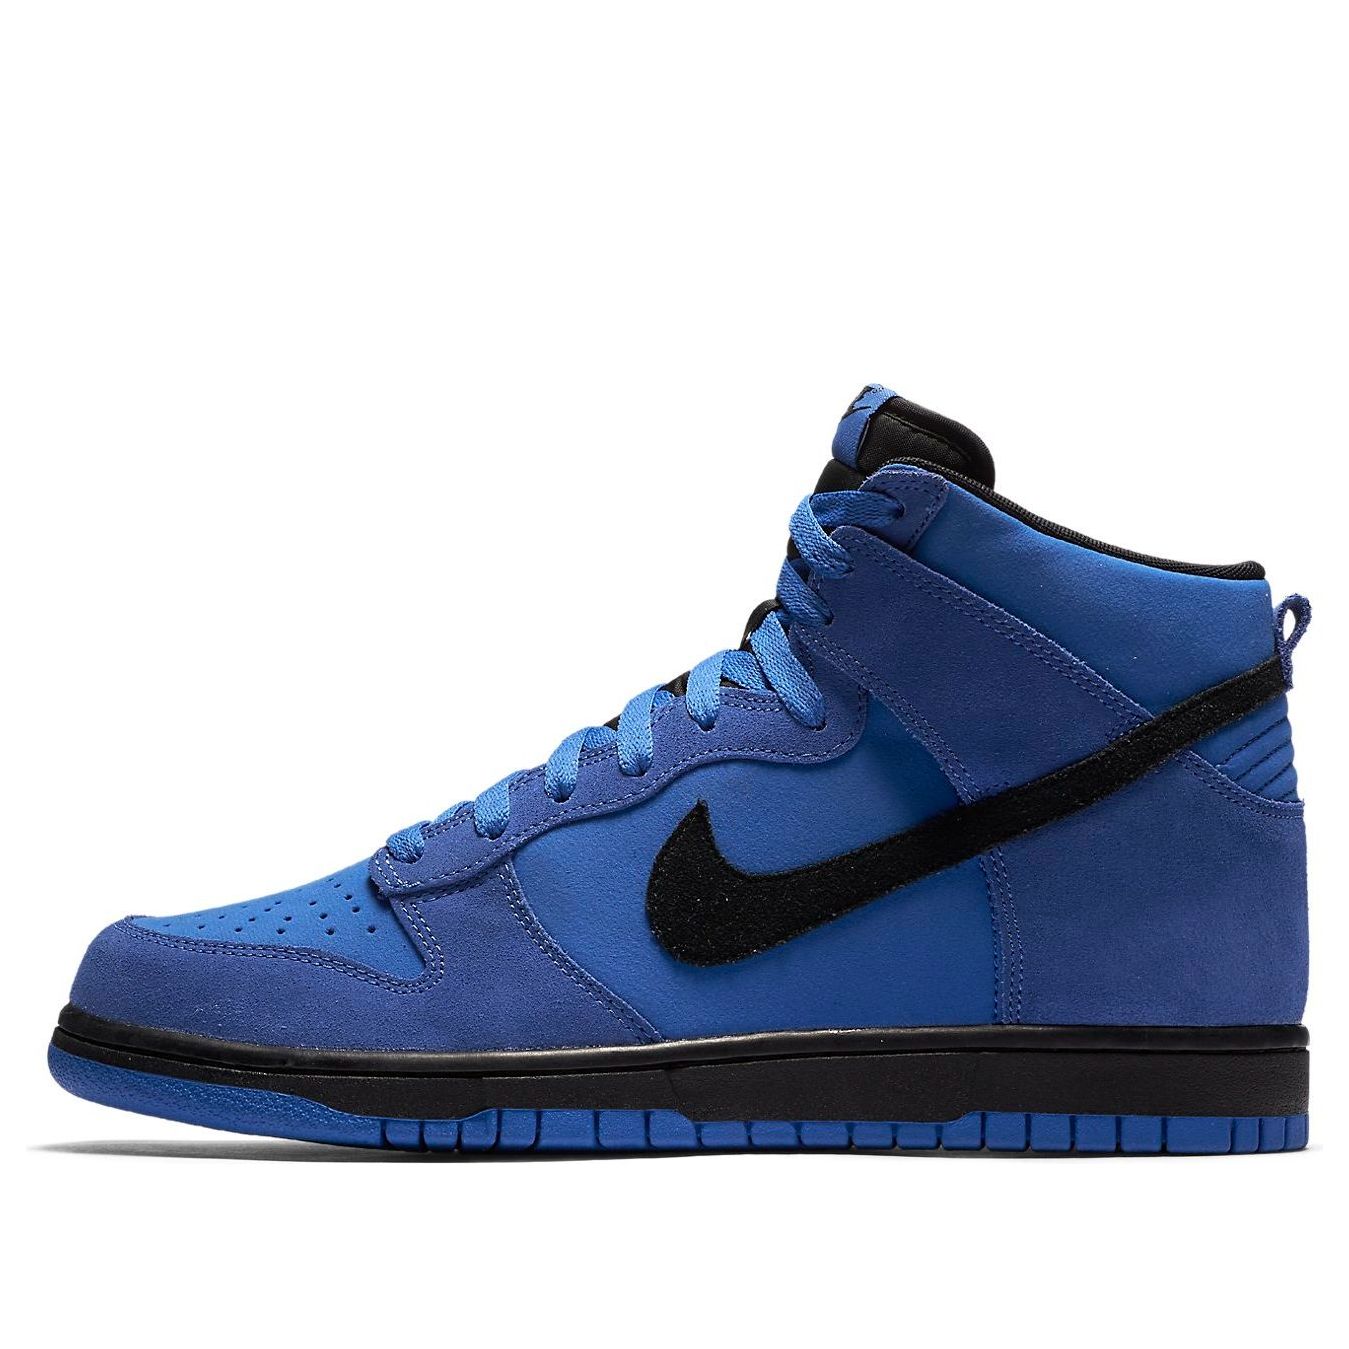 Nike Dunk High 'Comet Blue'  904233-401 Classic Sneakers